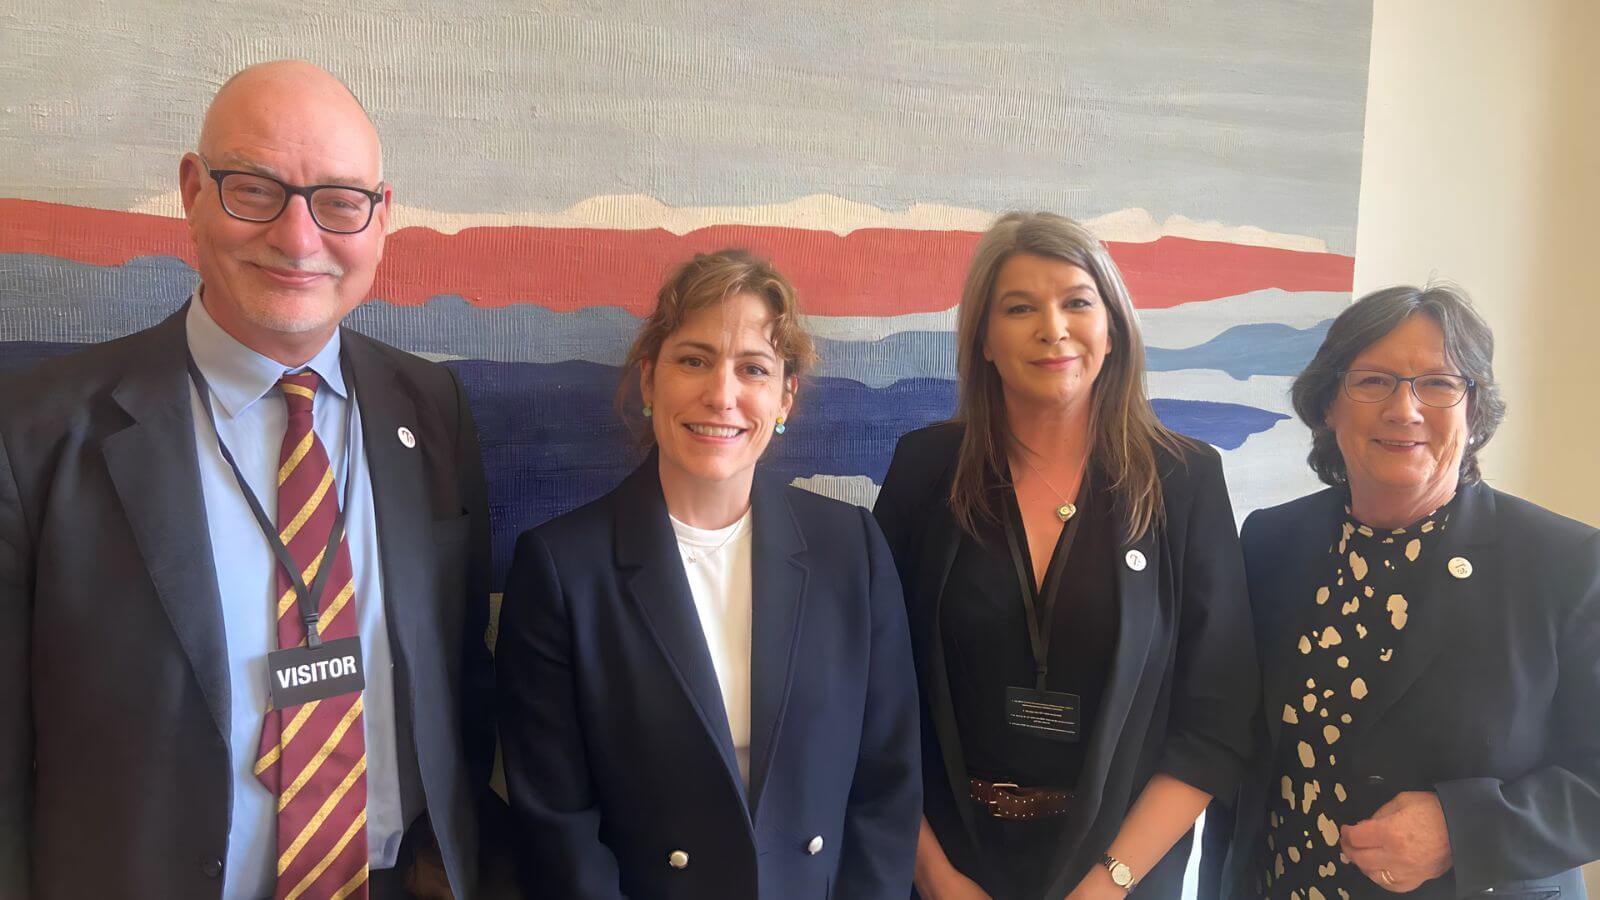 Victoria Atkins Aortic Dissection Secretary of State for Health and Social Care of the United Kingdom